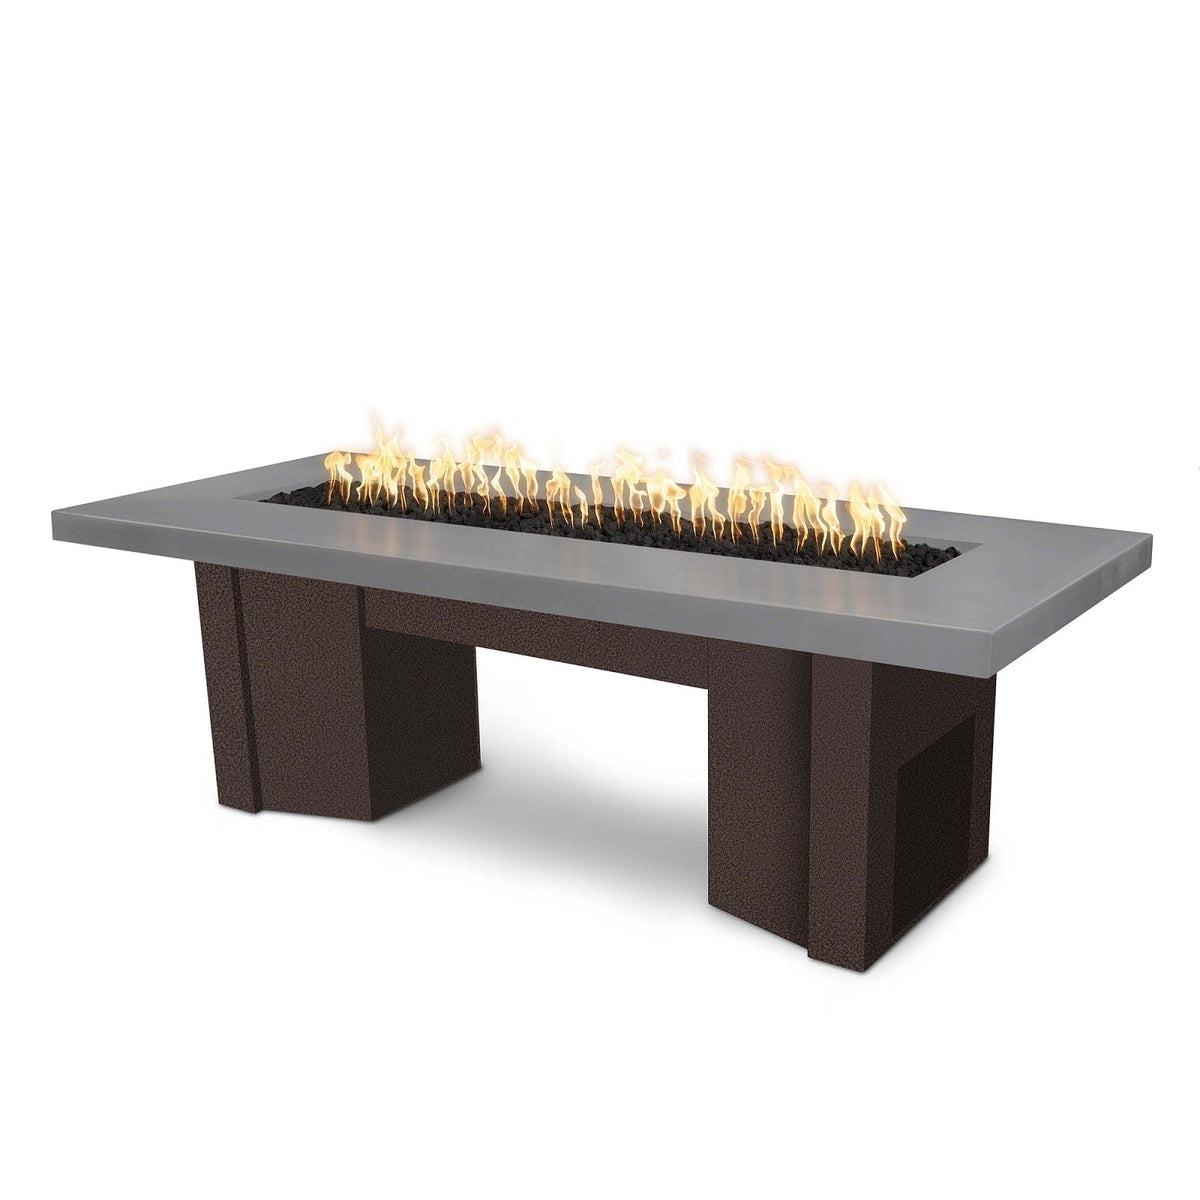 The Outdoor Plus Fire Features Natural Gray (-NGY) / Copper Vein Powder Coated Steel (-CPV) The Outdoor Plus 60&quot; Alameda Fire Table Smooth Concrete in Natural Gas - Match Lit with Flame Sense System / OPT-ALMGFRC60FSML-NG